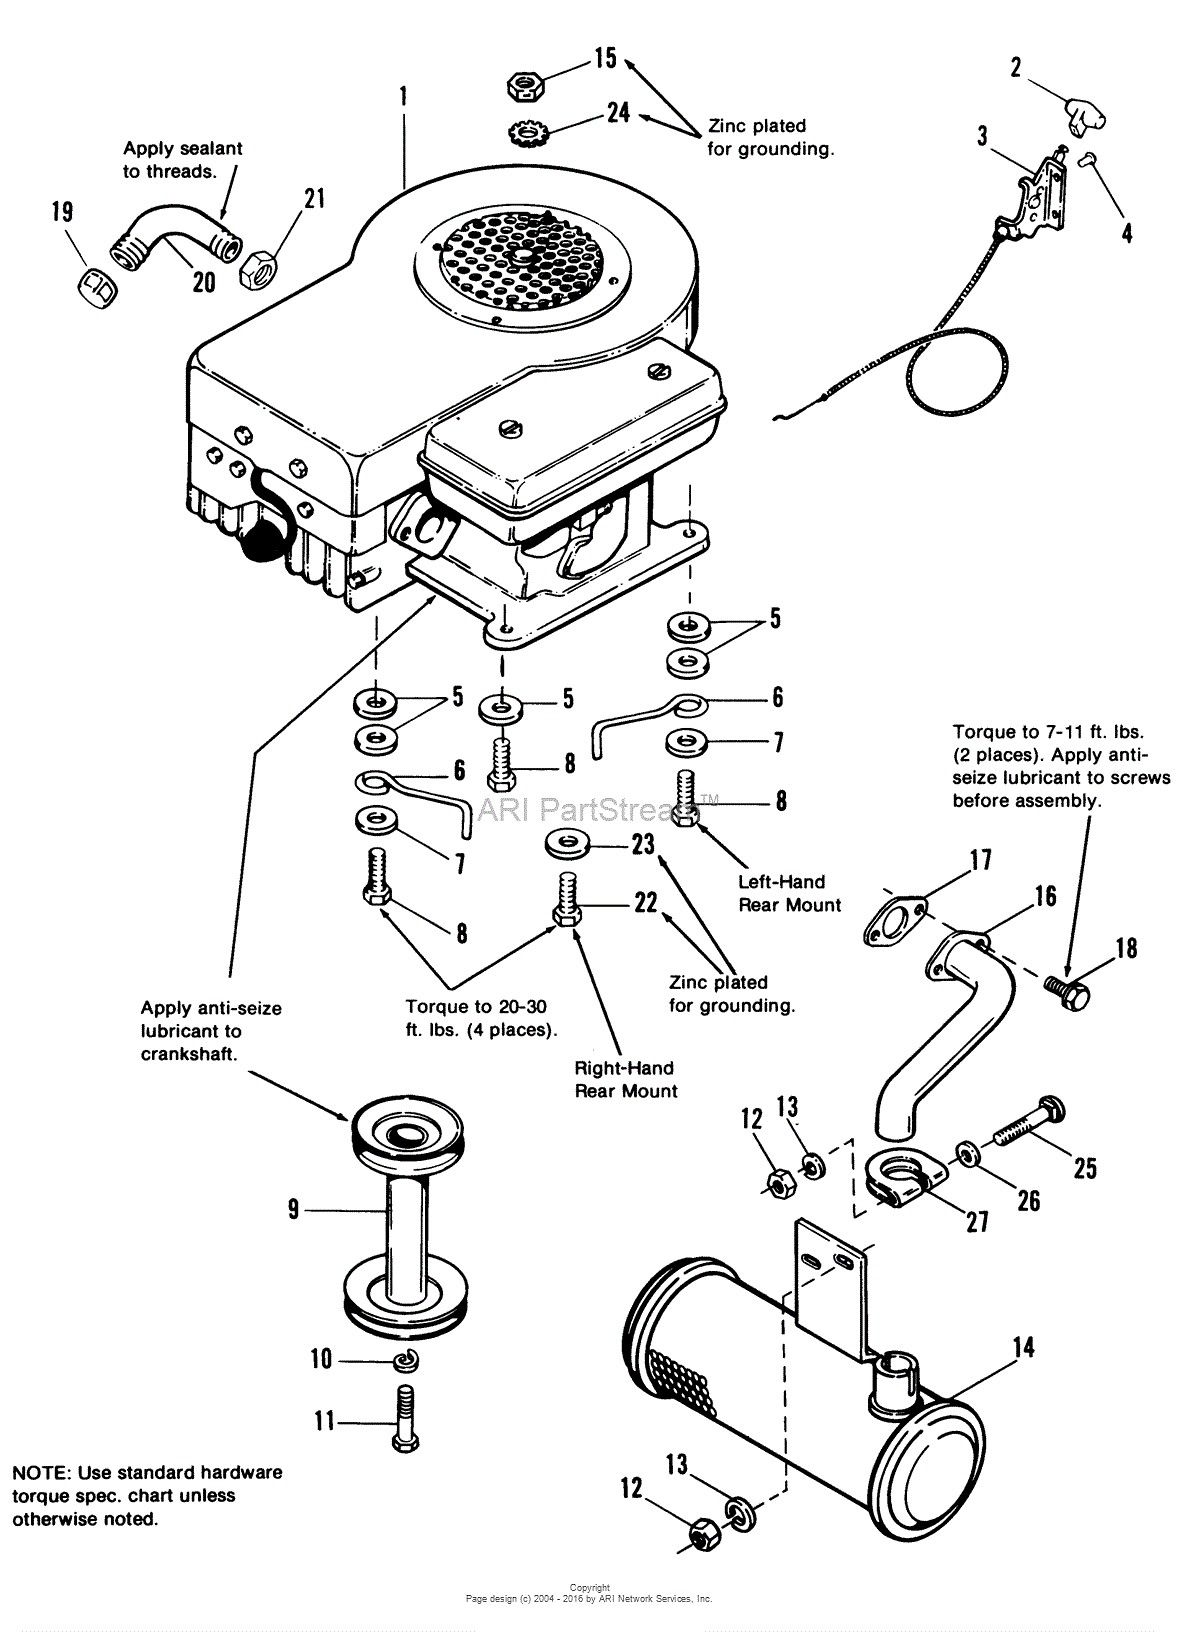 Briggs and Stratton Lawn Mower Engine Parts Diagram Simplicity 4212h 12 5hp B&s Tractor W Agrifab Parts Of Briggs and Stratton Lawn Mower Engine Parts Diagram